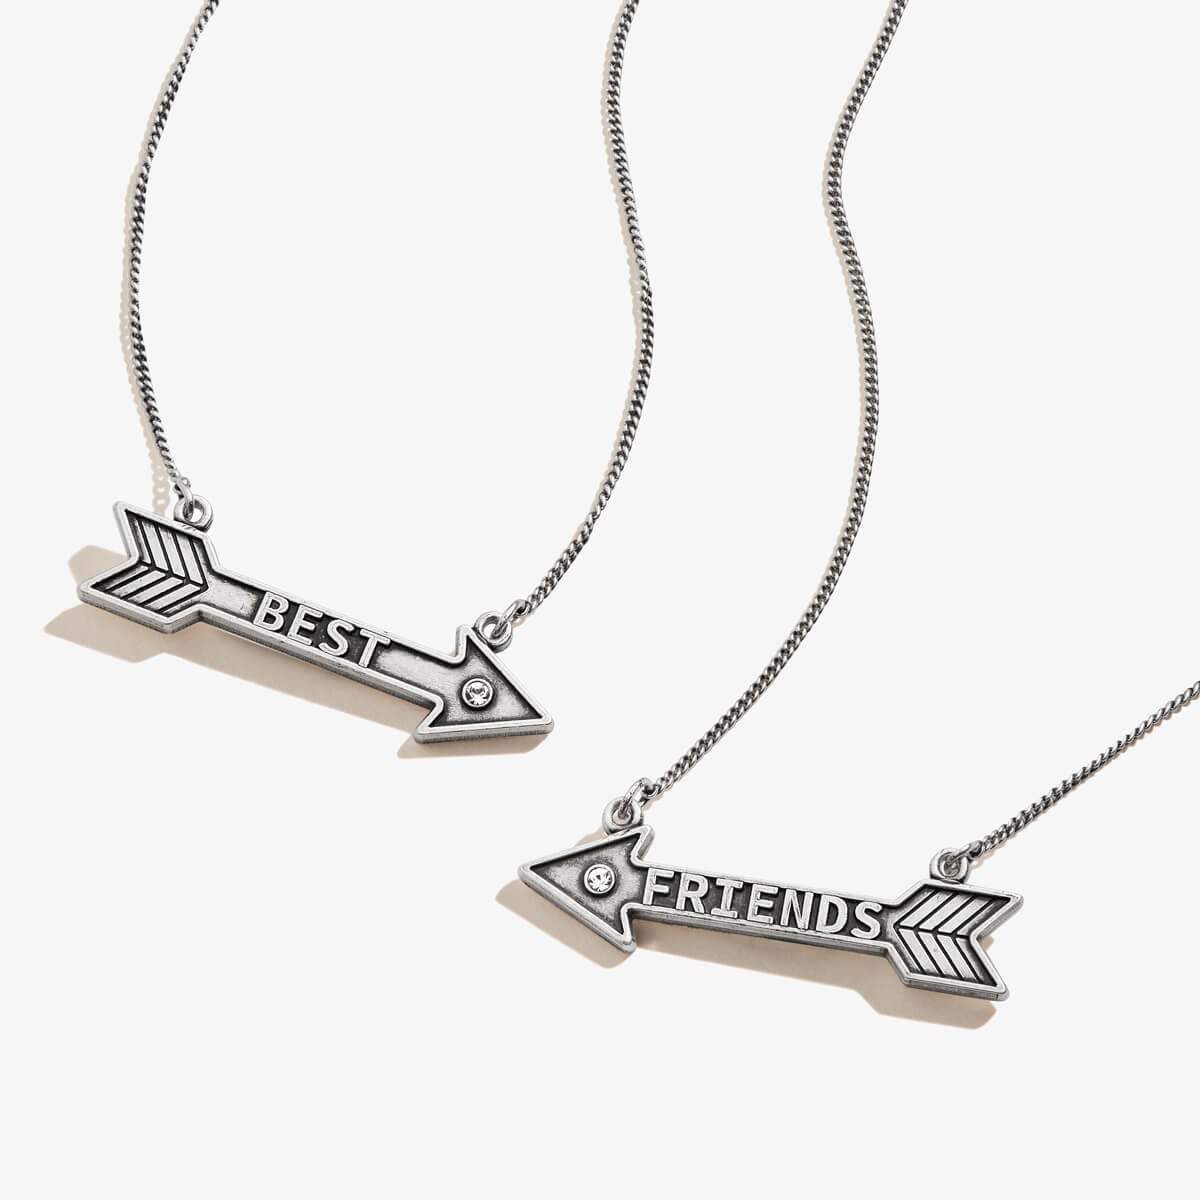 Best Friends Arrow Necklace, Set of 2 AND ANI